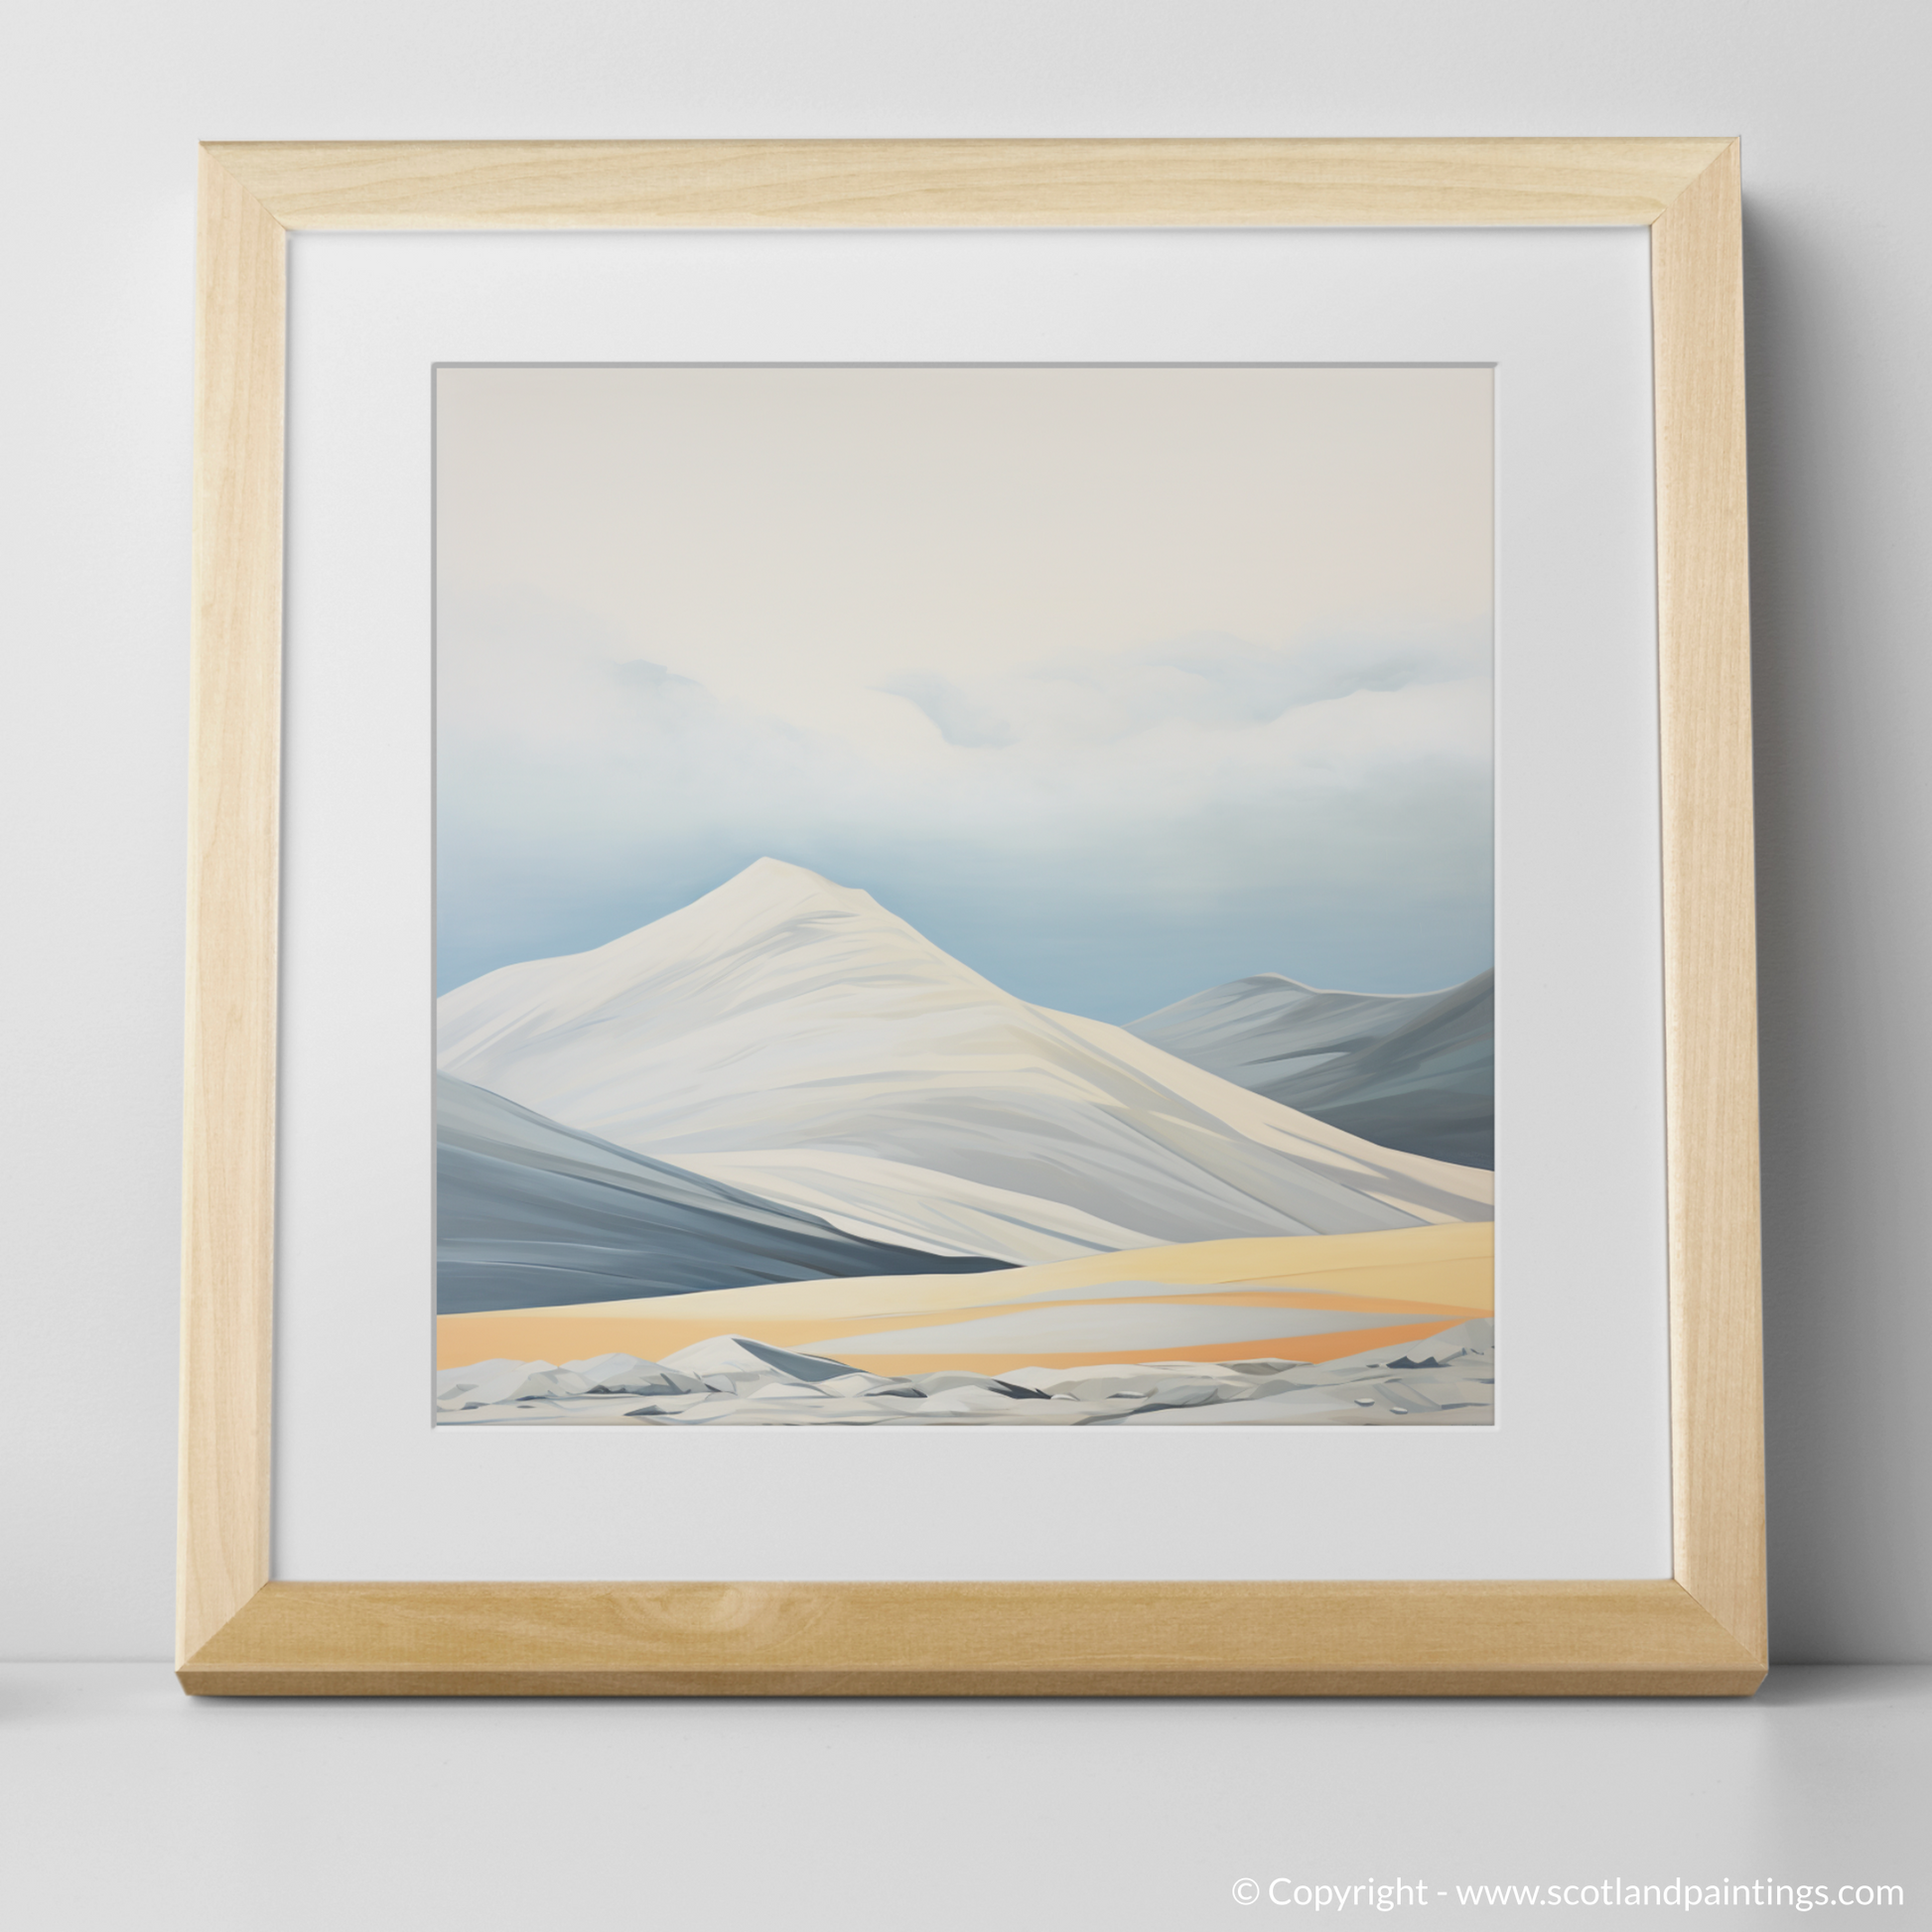 Art Print of Ben Lawers with a natural frame